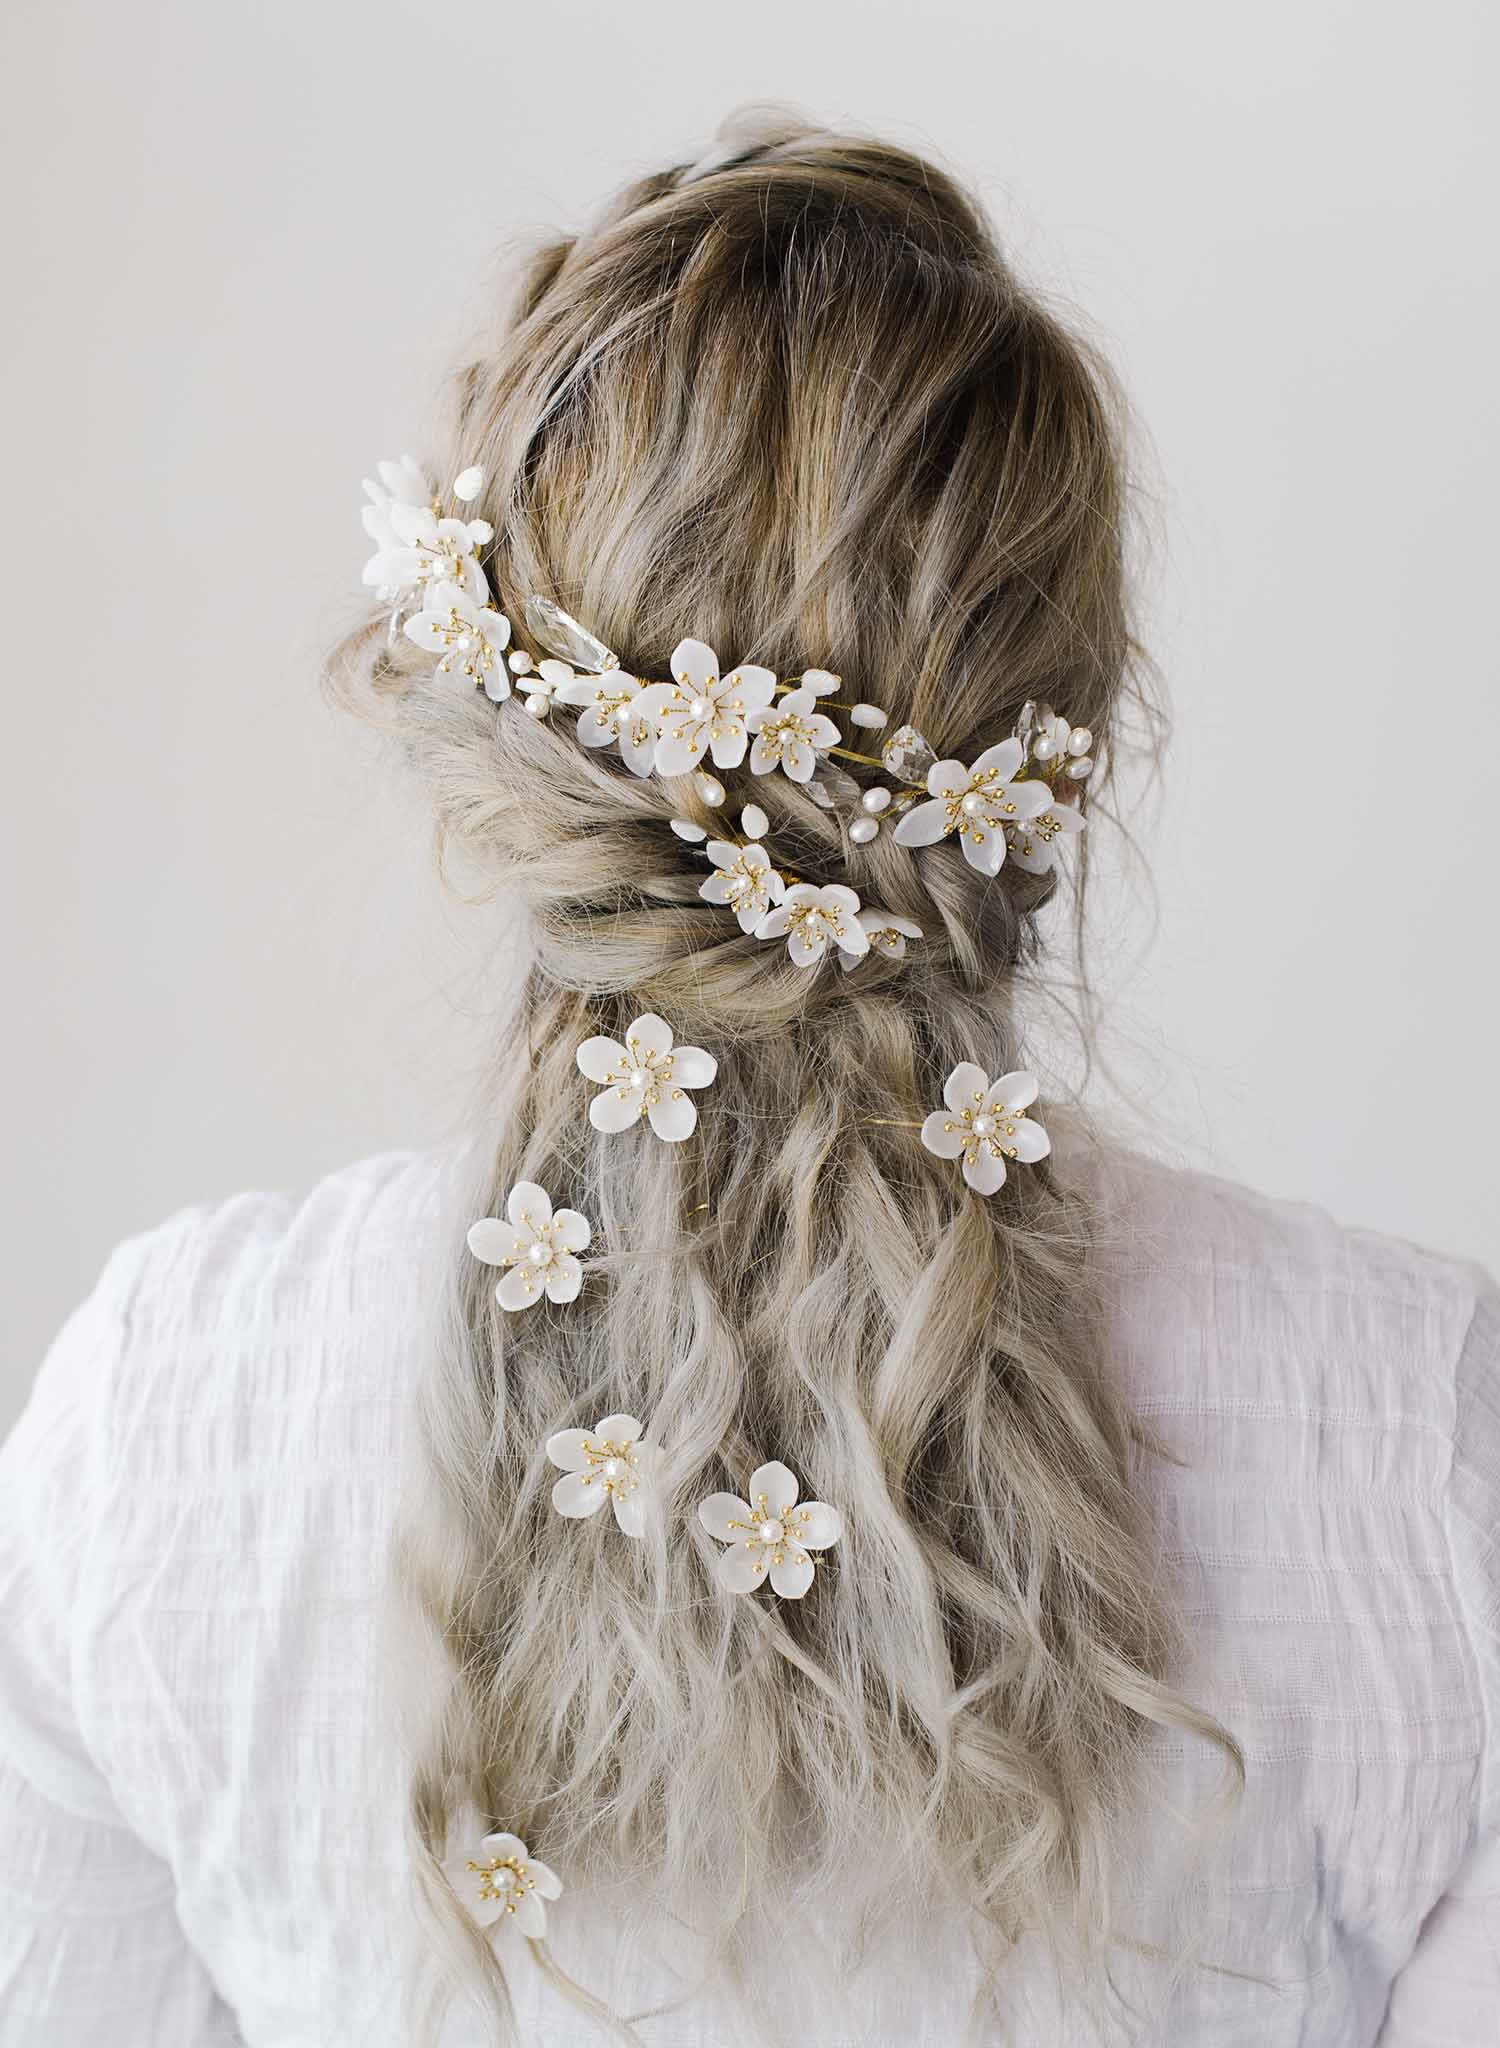 The 38 Best Bridal Hair Accessories for 2023